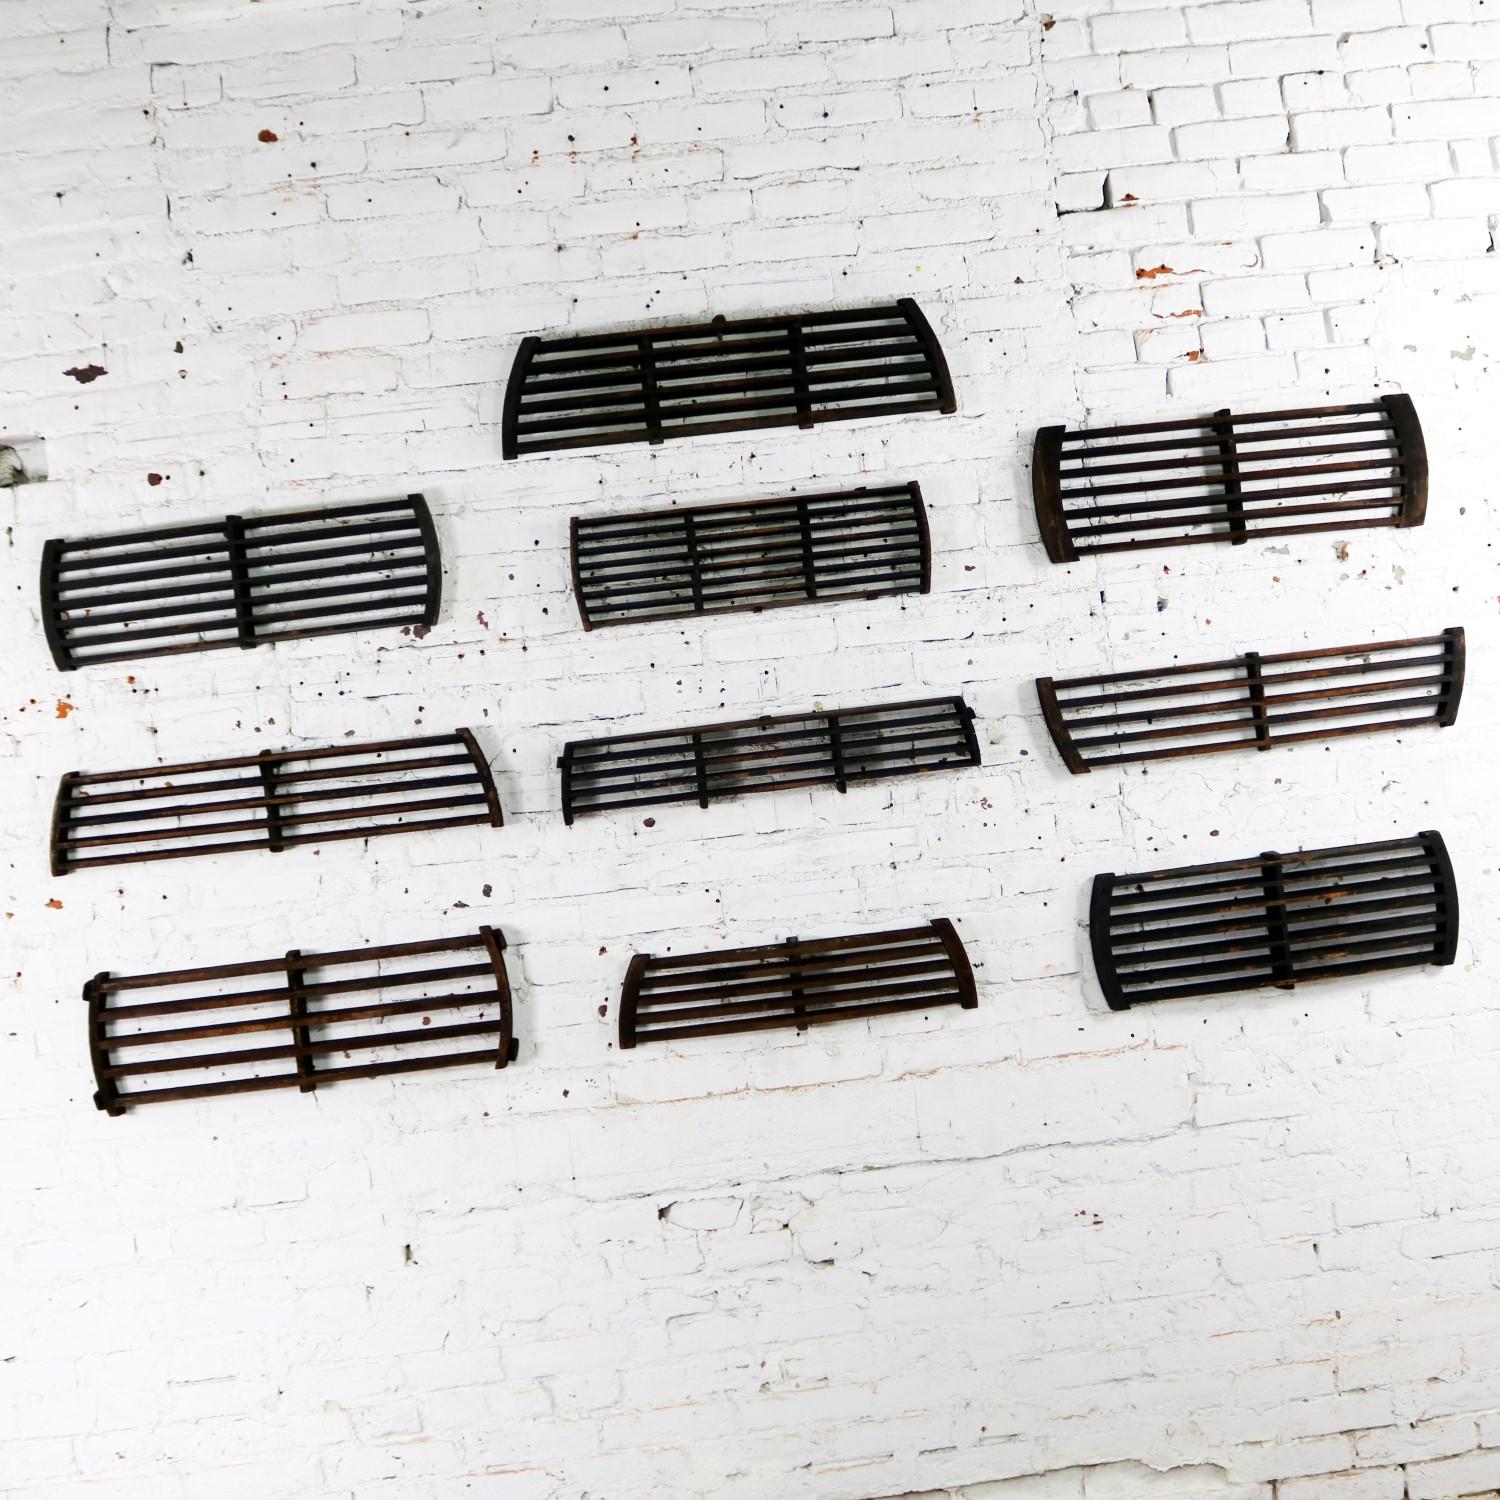 Incredible slatted antique handmade wood industrial foundry patterns. These were created to make the sand cast molds for casting iron sewage grates. There are ten patterns in this group, but we have priced them separately. We will sell one through